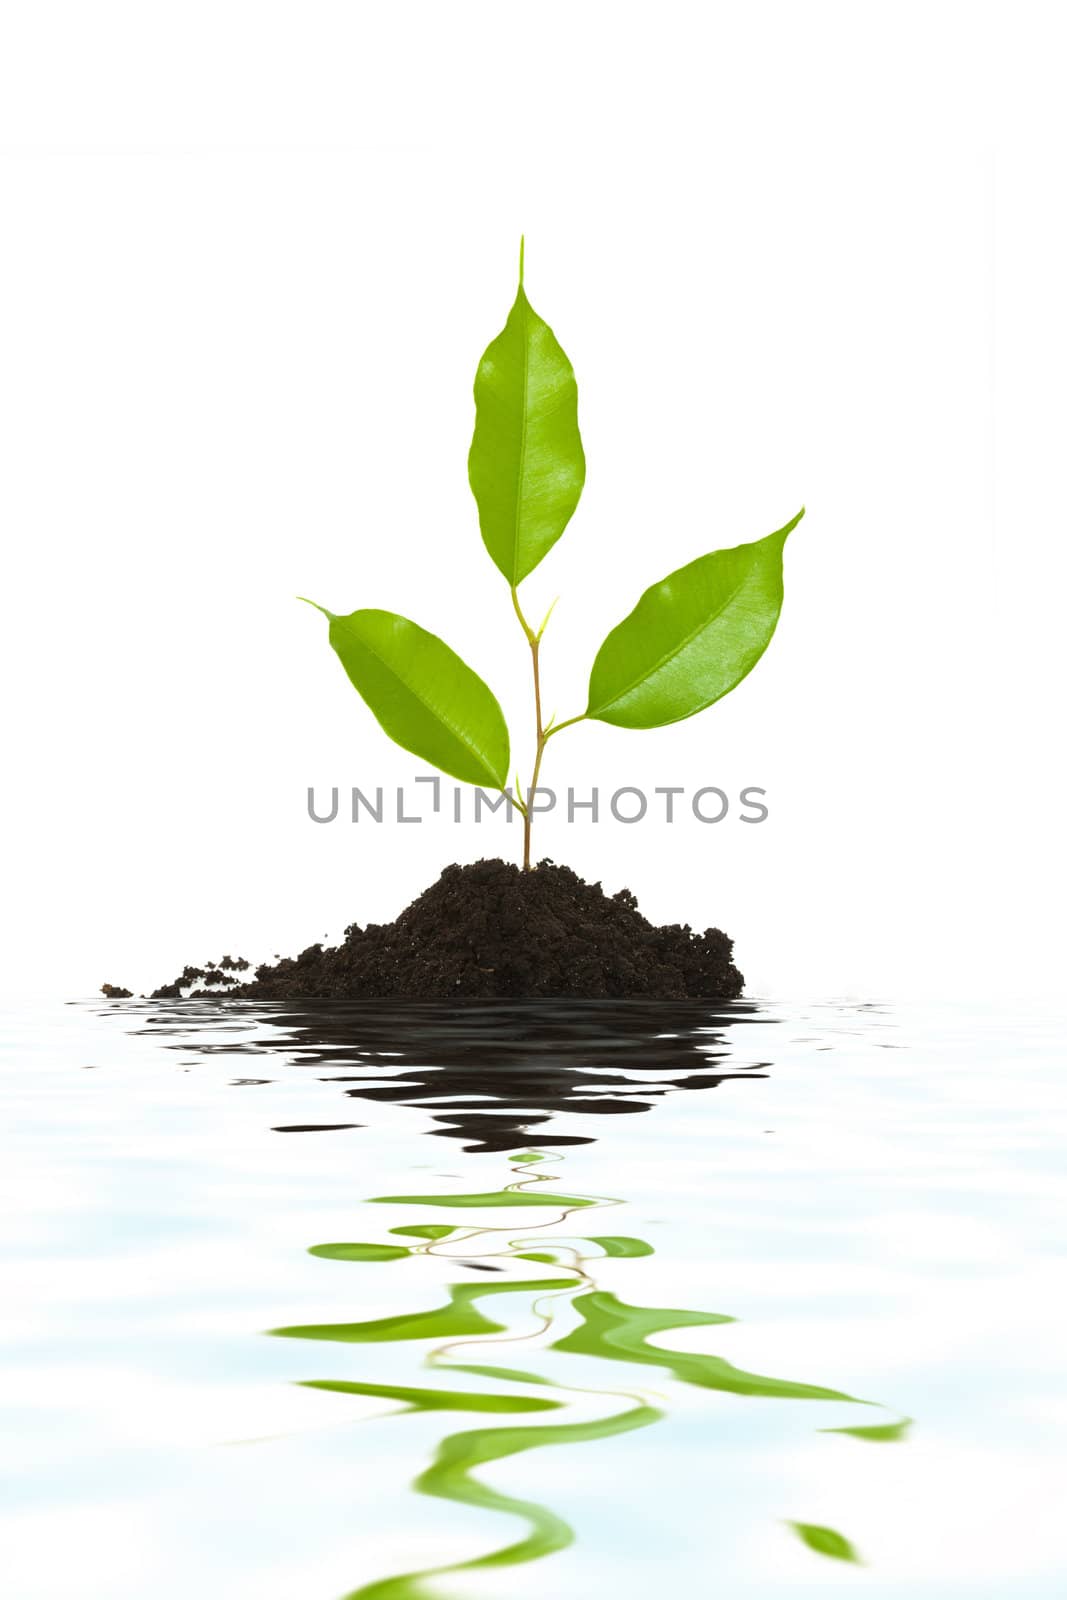 An image of a tiny green plant and water